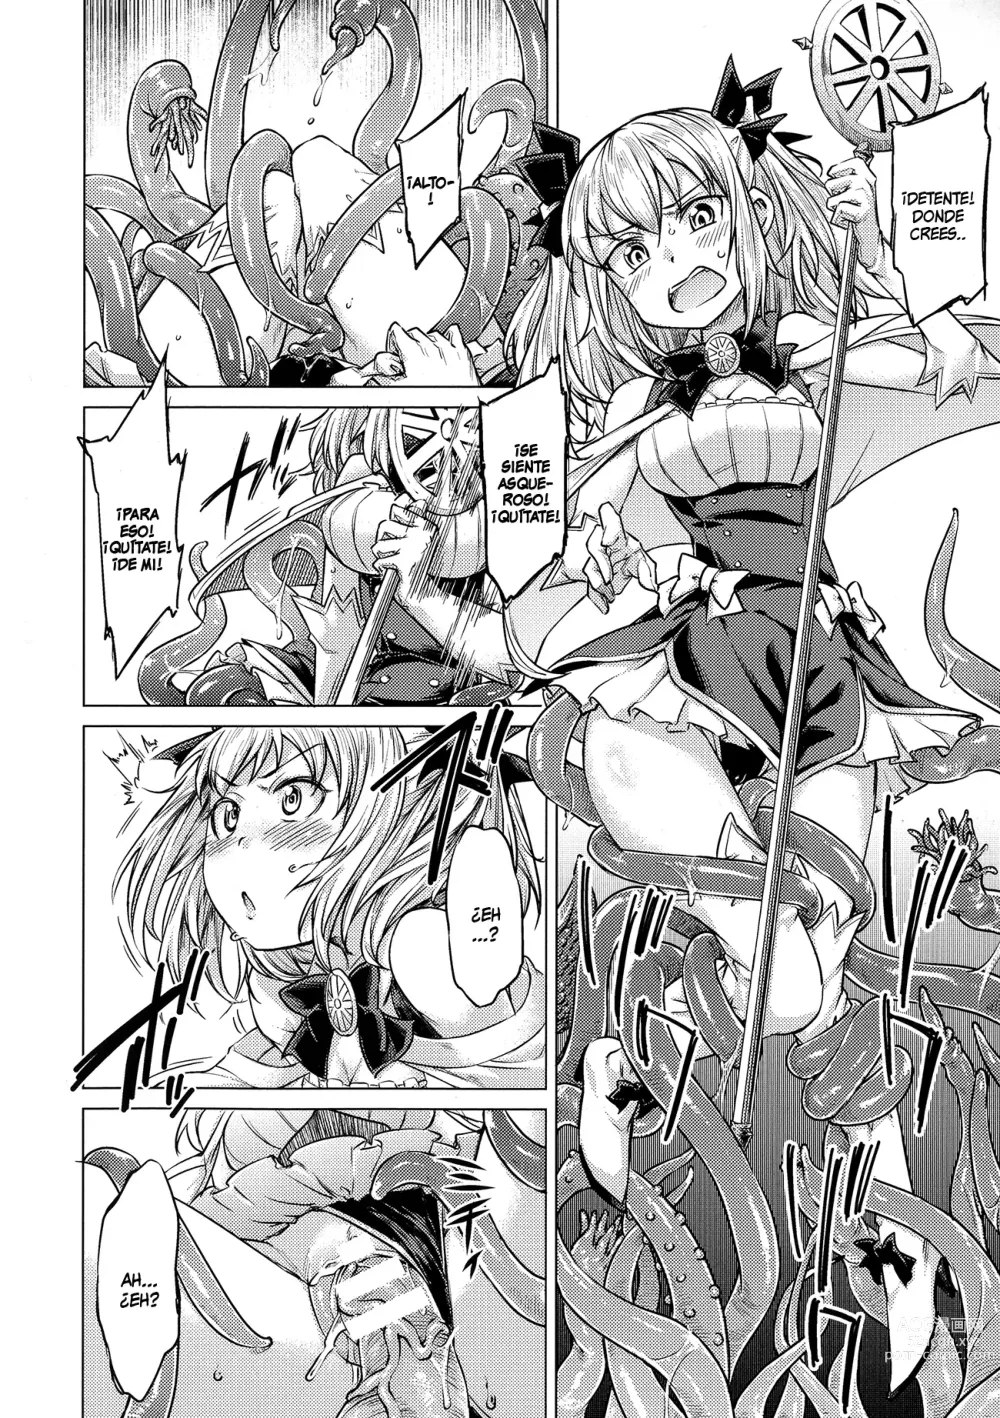 Page 4 of manga Tentacle Maiden